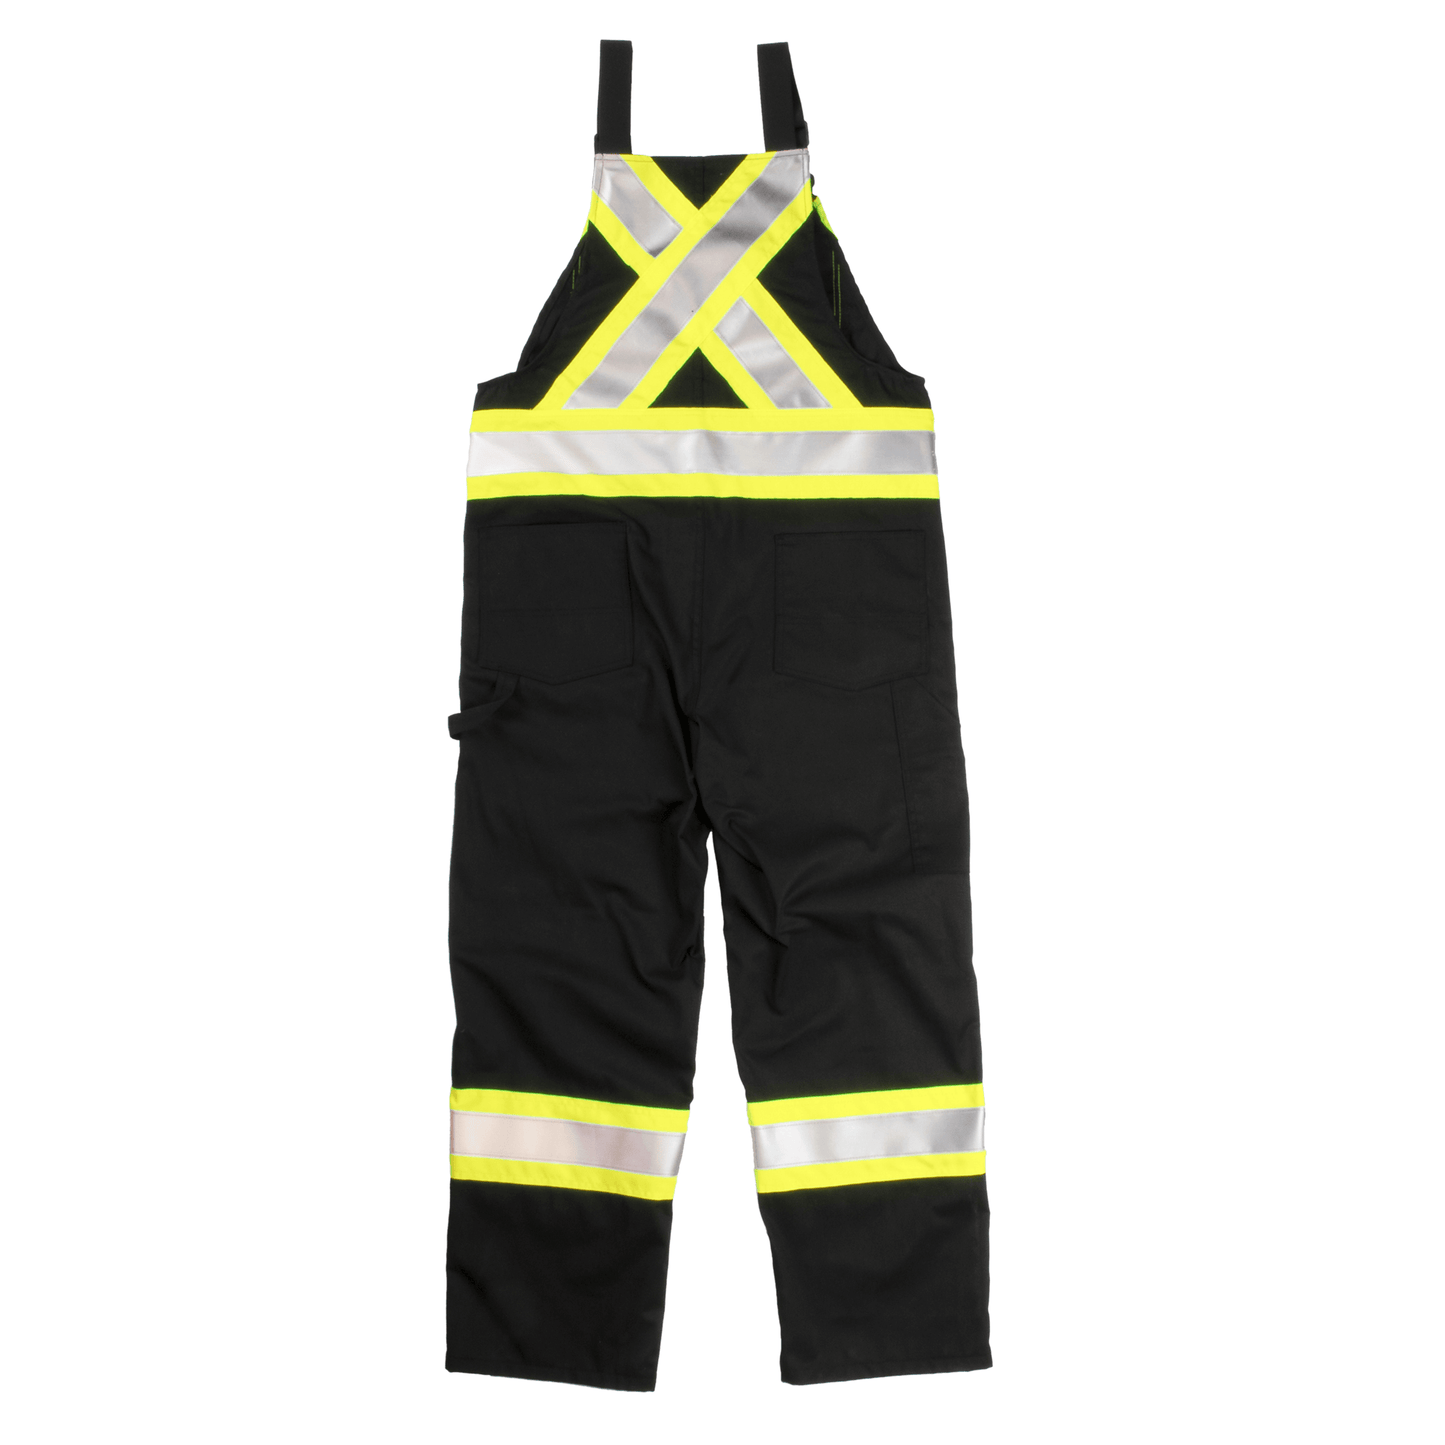 Tough Duck Unlined Safety Overall - S769 - Black - back